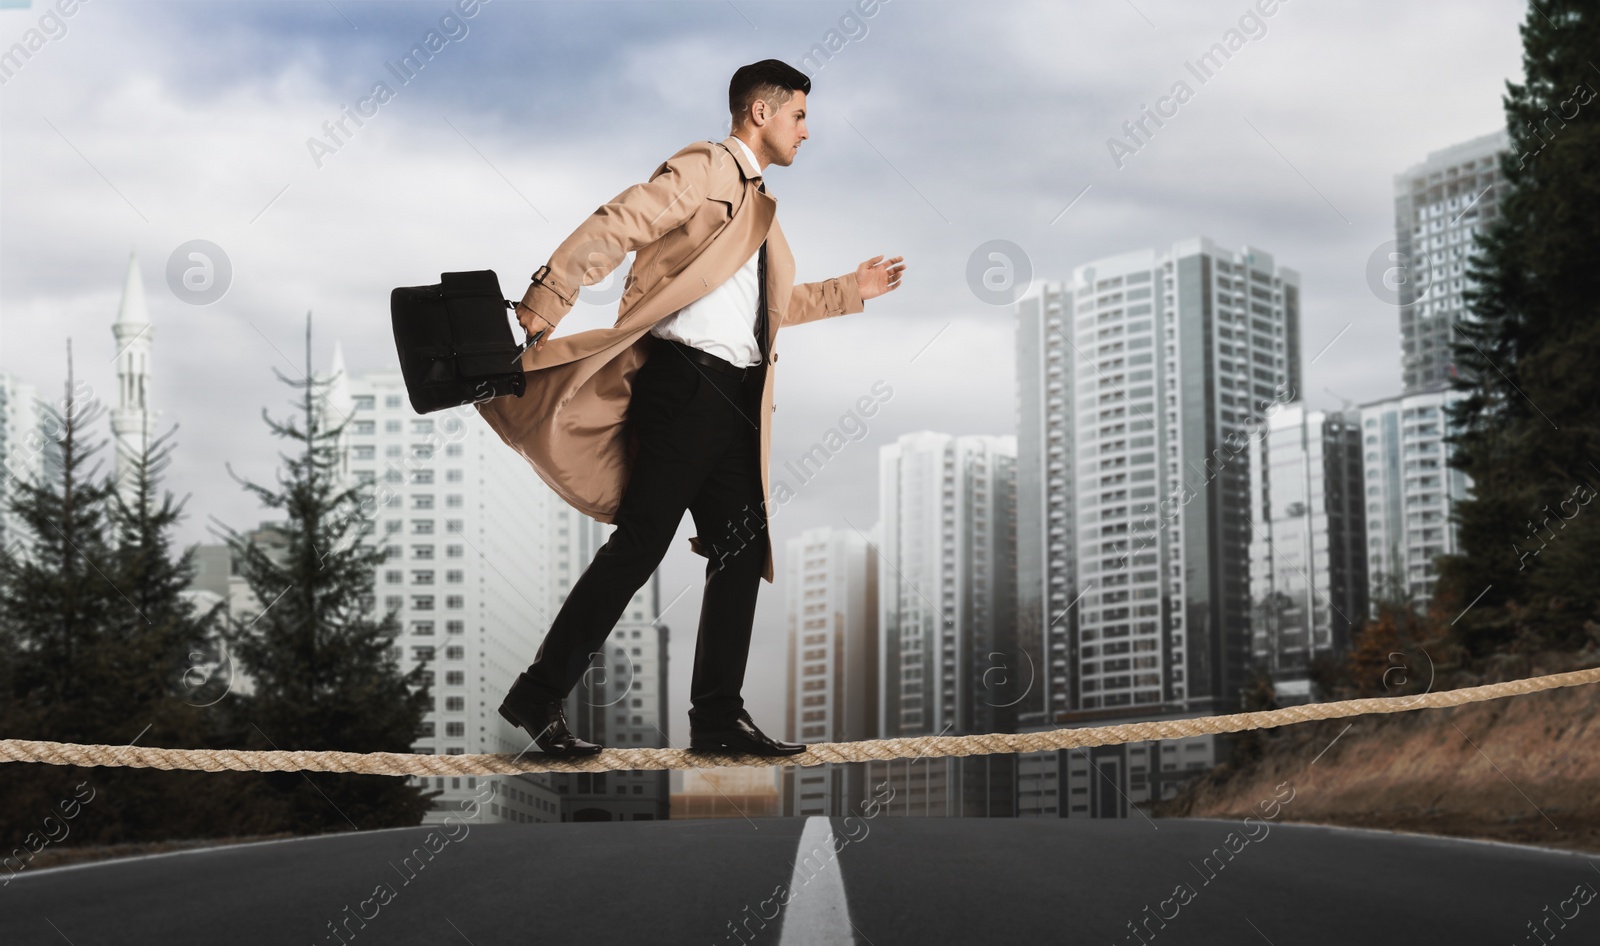 Image of Risks and challenges of entrepreneurship. Concentrated businessman with portfolio crossing road on rope outdoors